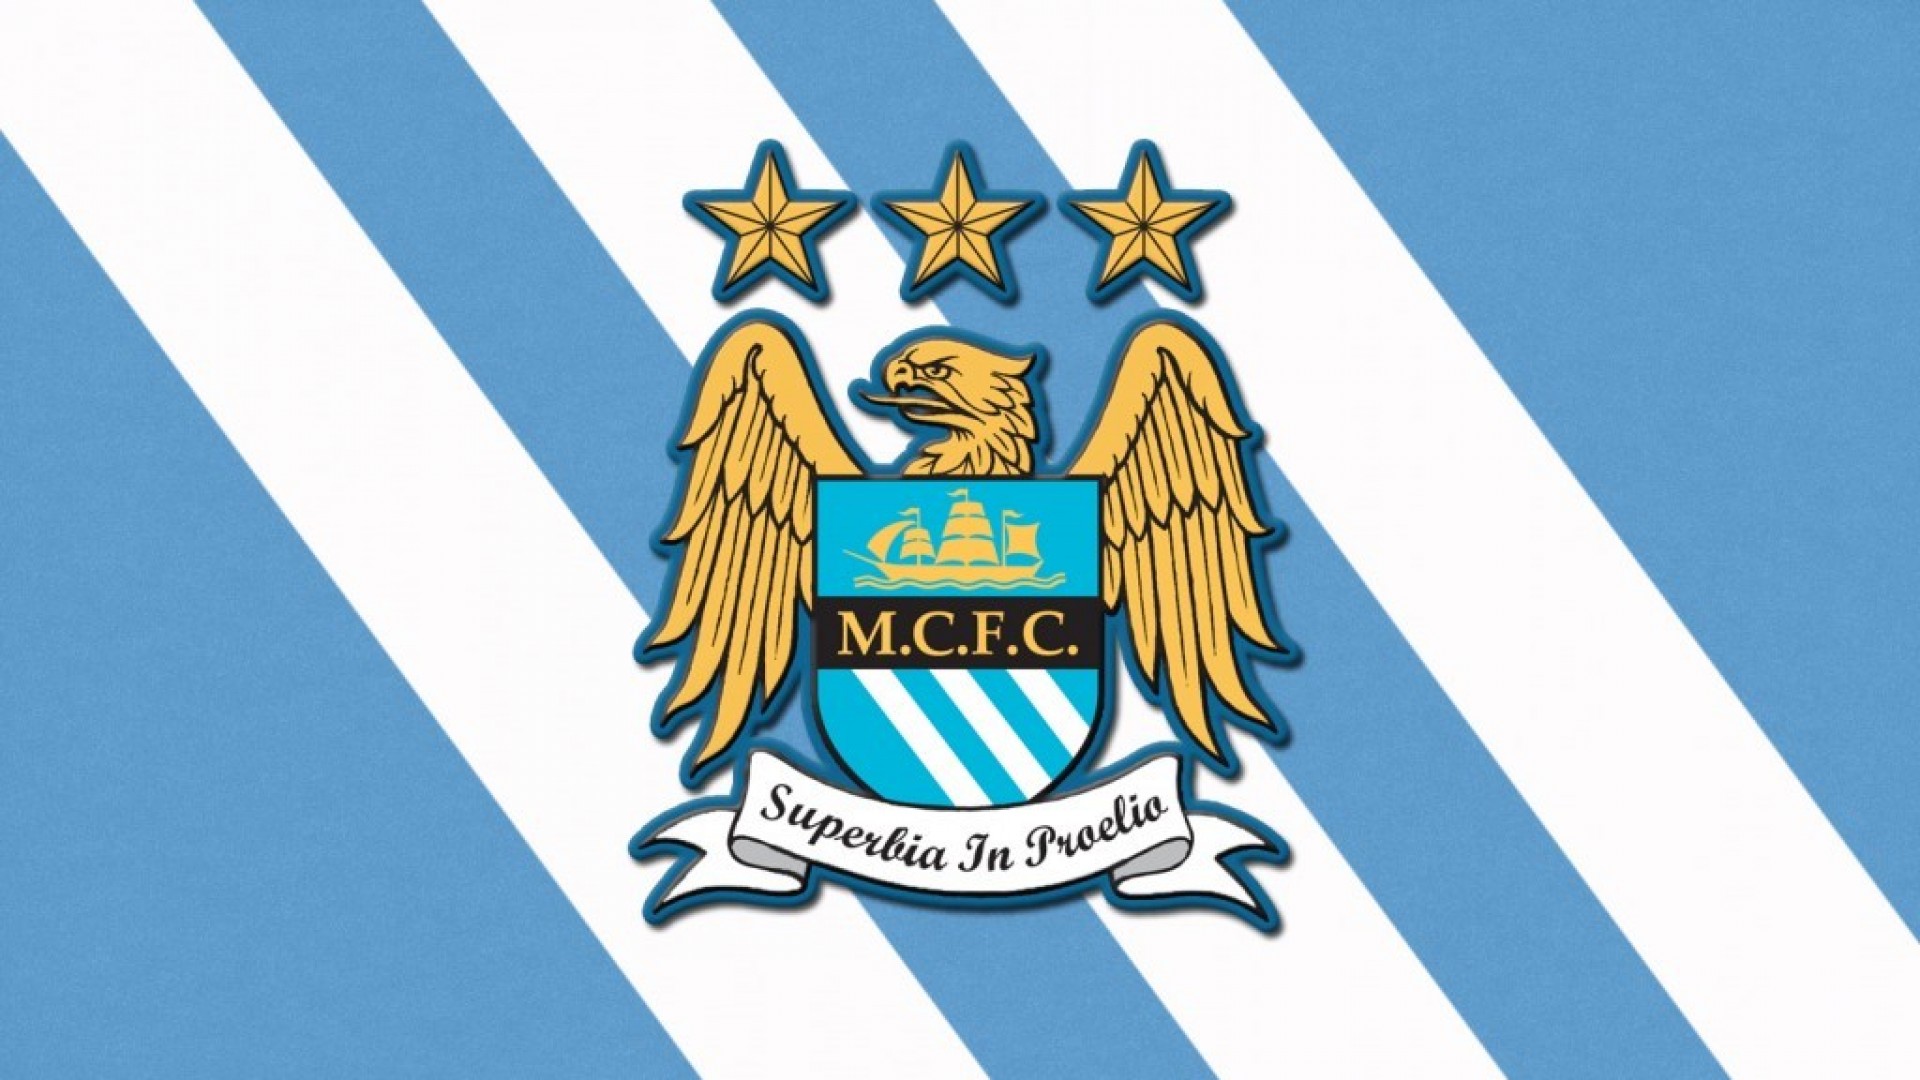 Manchester City Wallpaper Part Manchester City Wallpaper And Paint Download Wallpapers Hd Guide